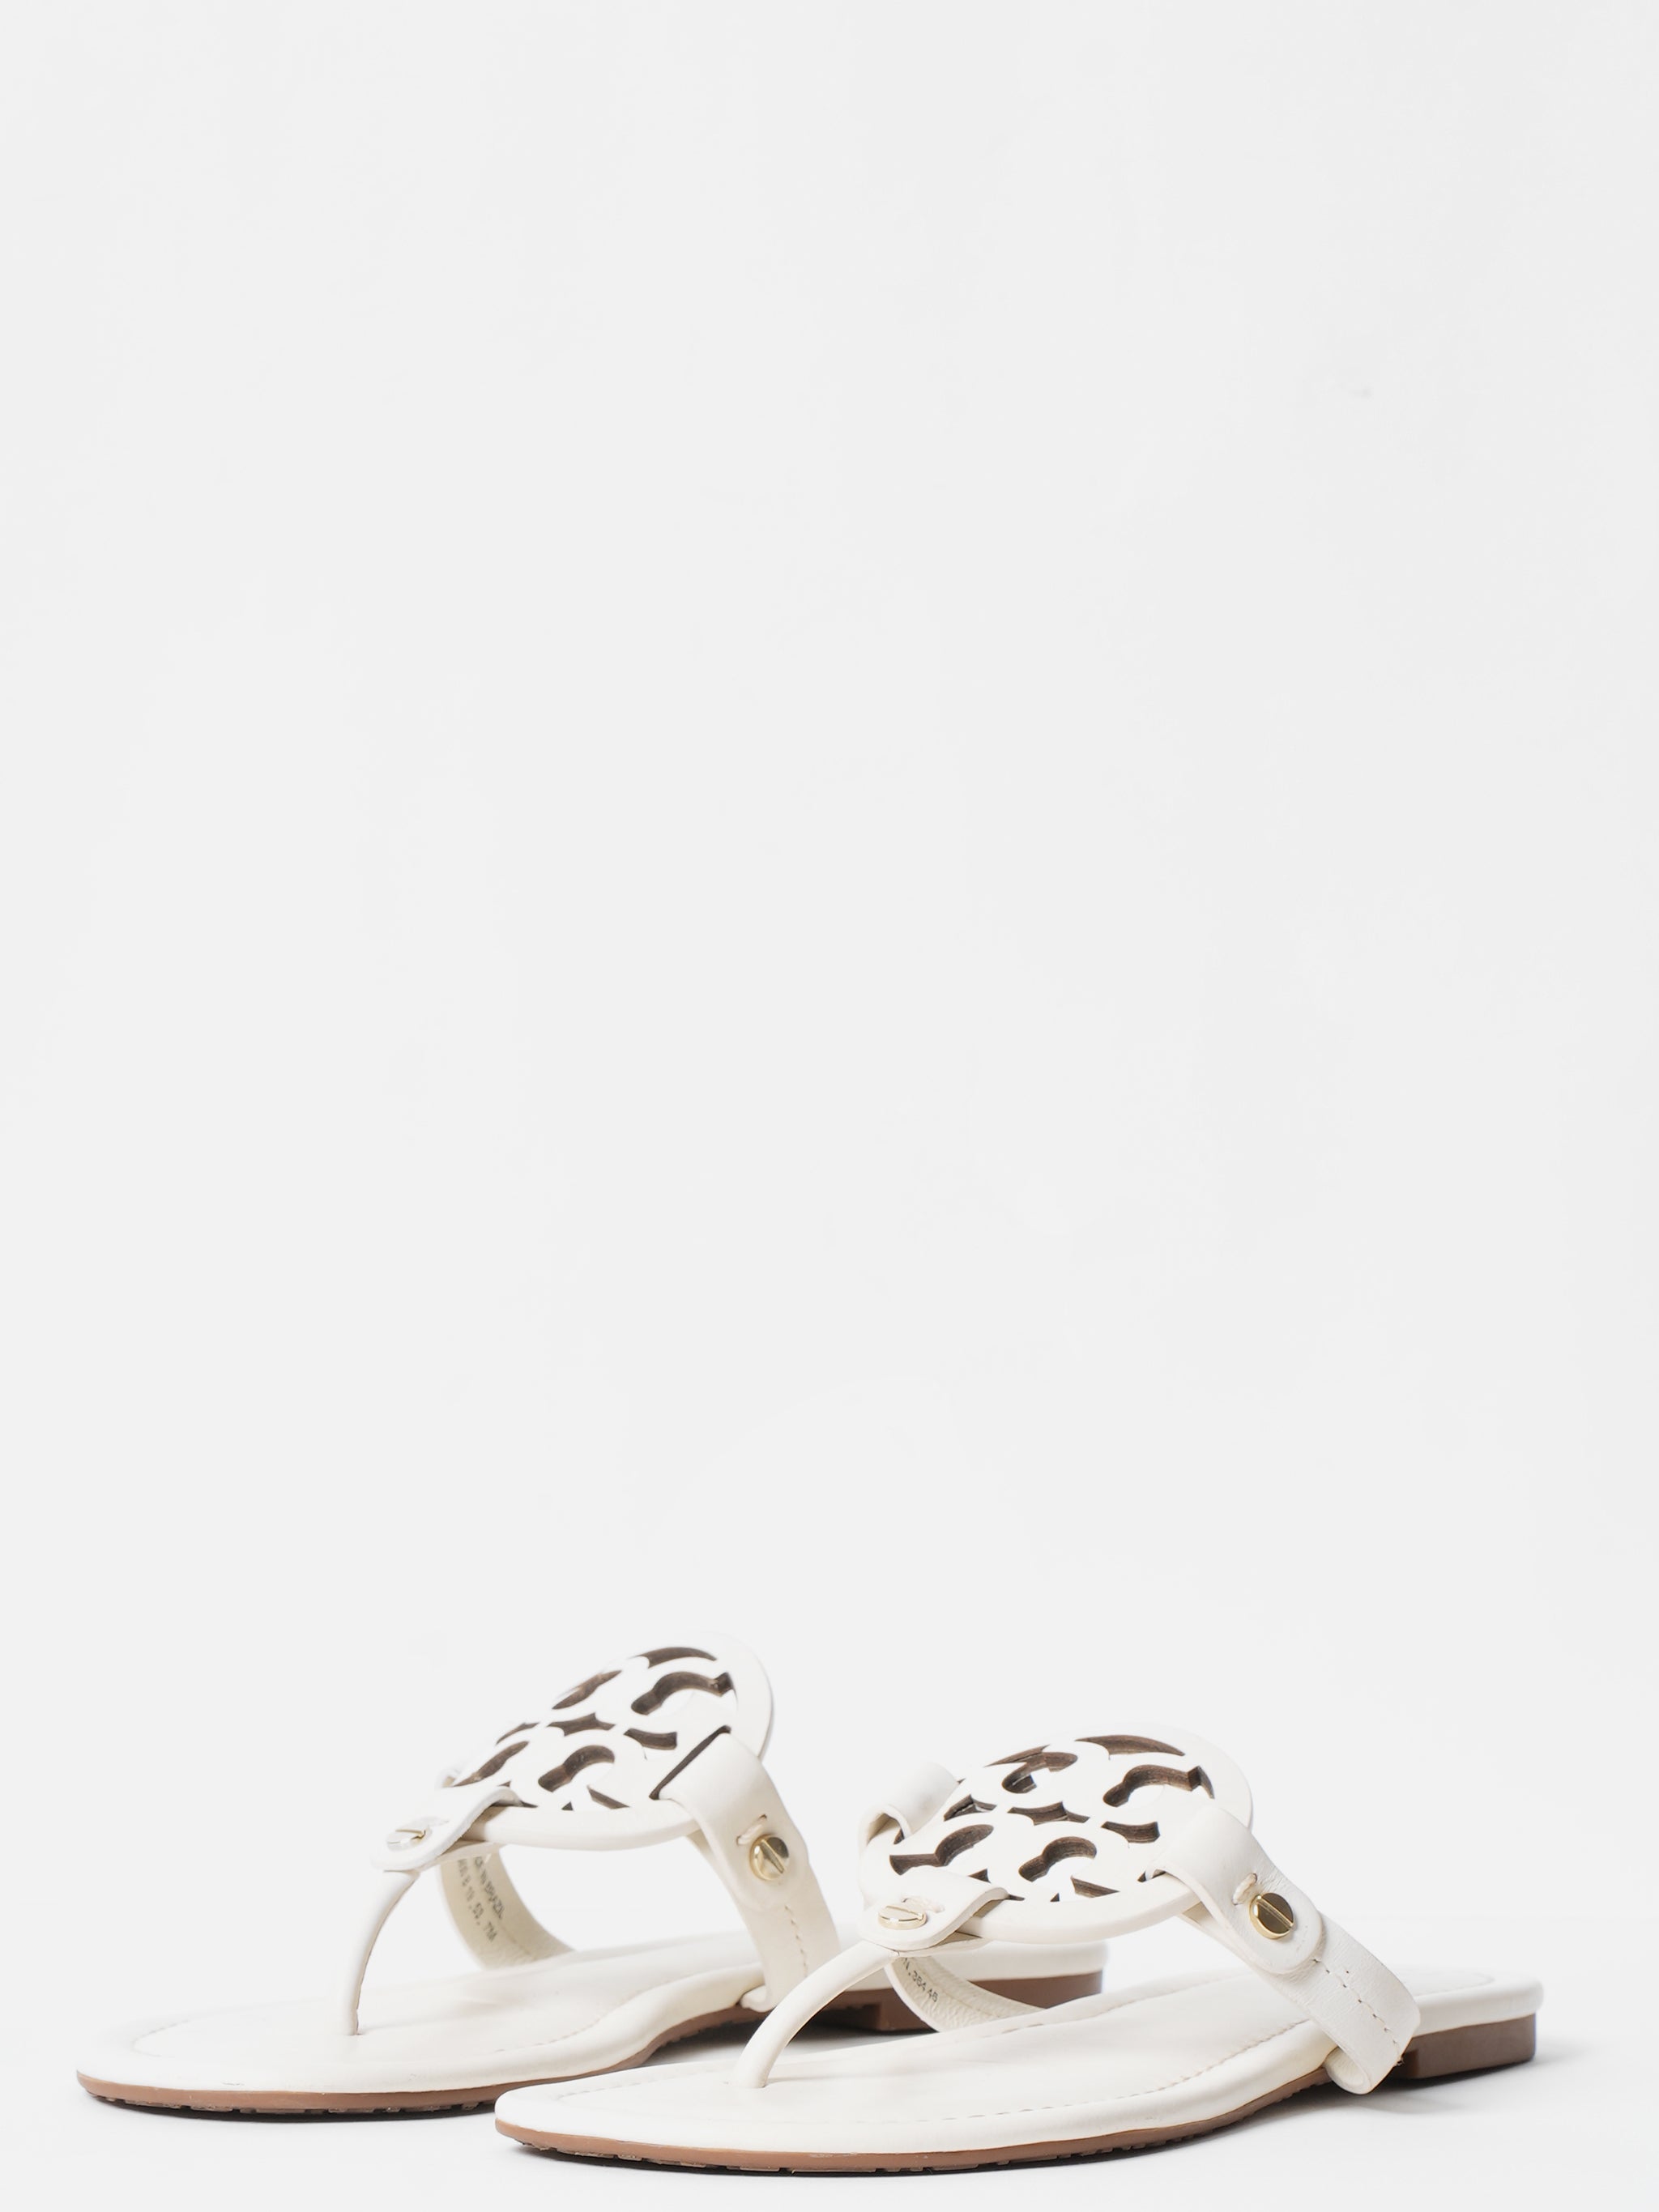 New Tory Burch White Sandals